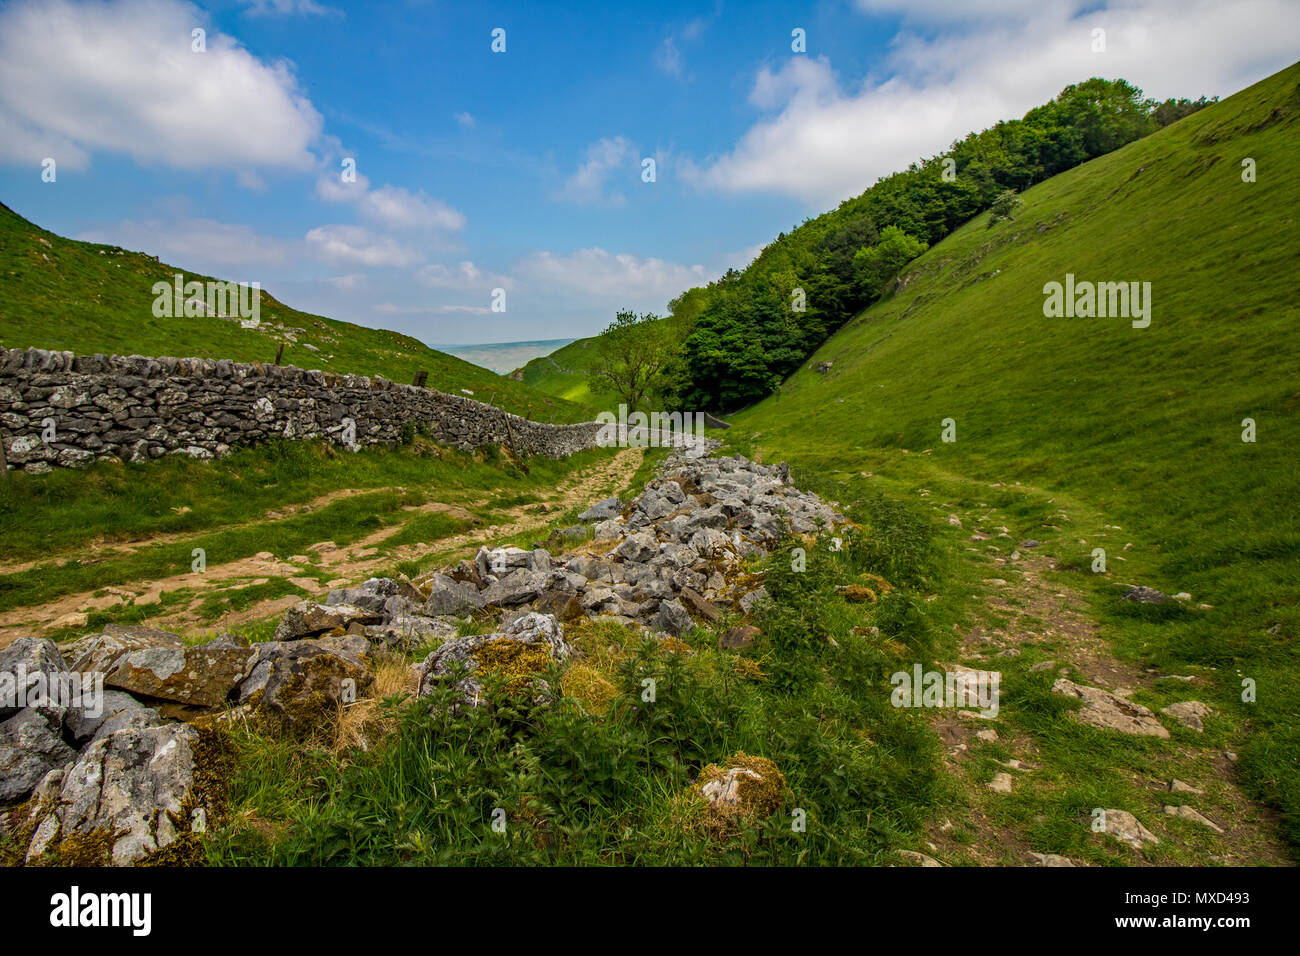 Pathway beside stone wall leading into Cavedale in the English Peak District Stock Photo